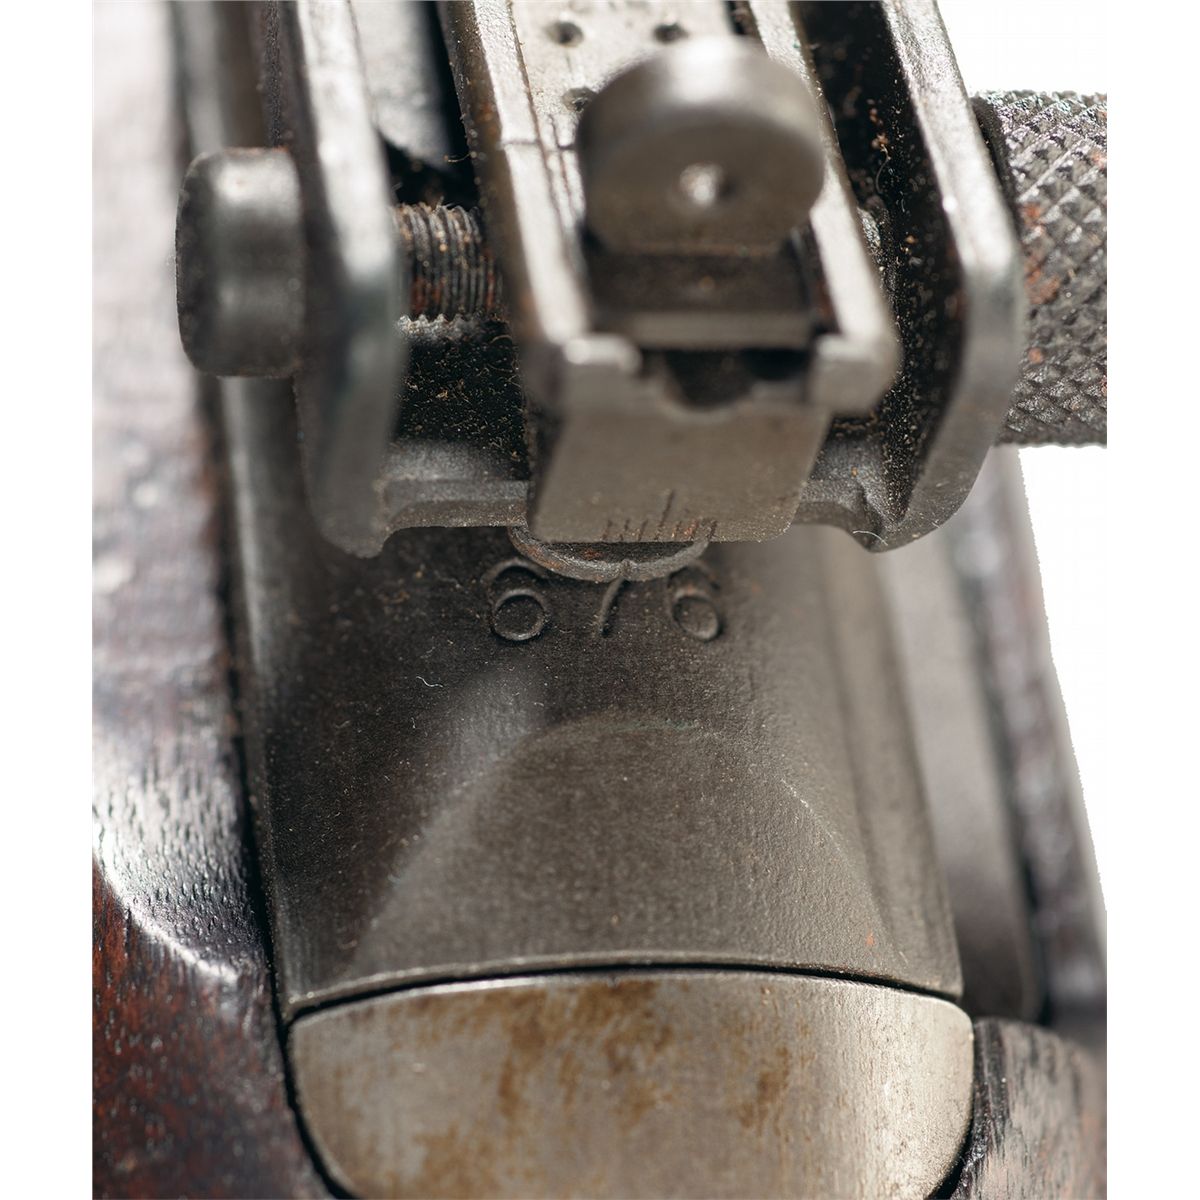 inland 30 carbine serial numbers